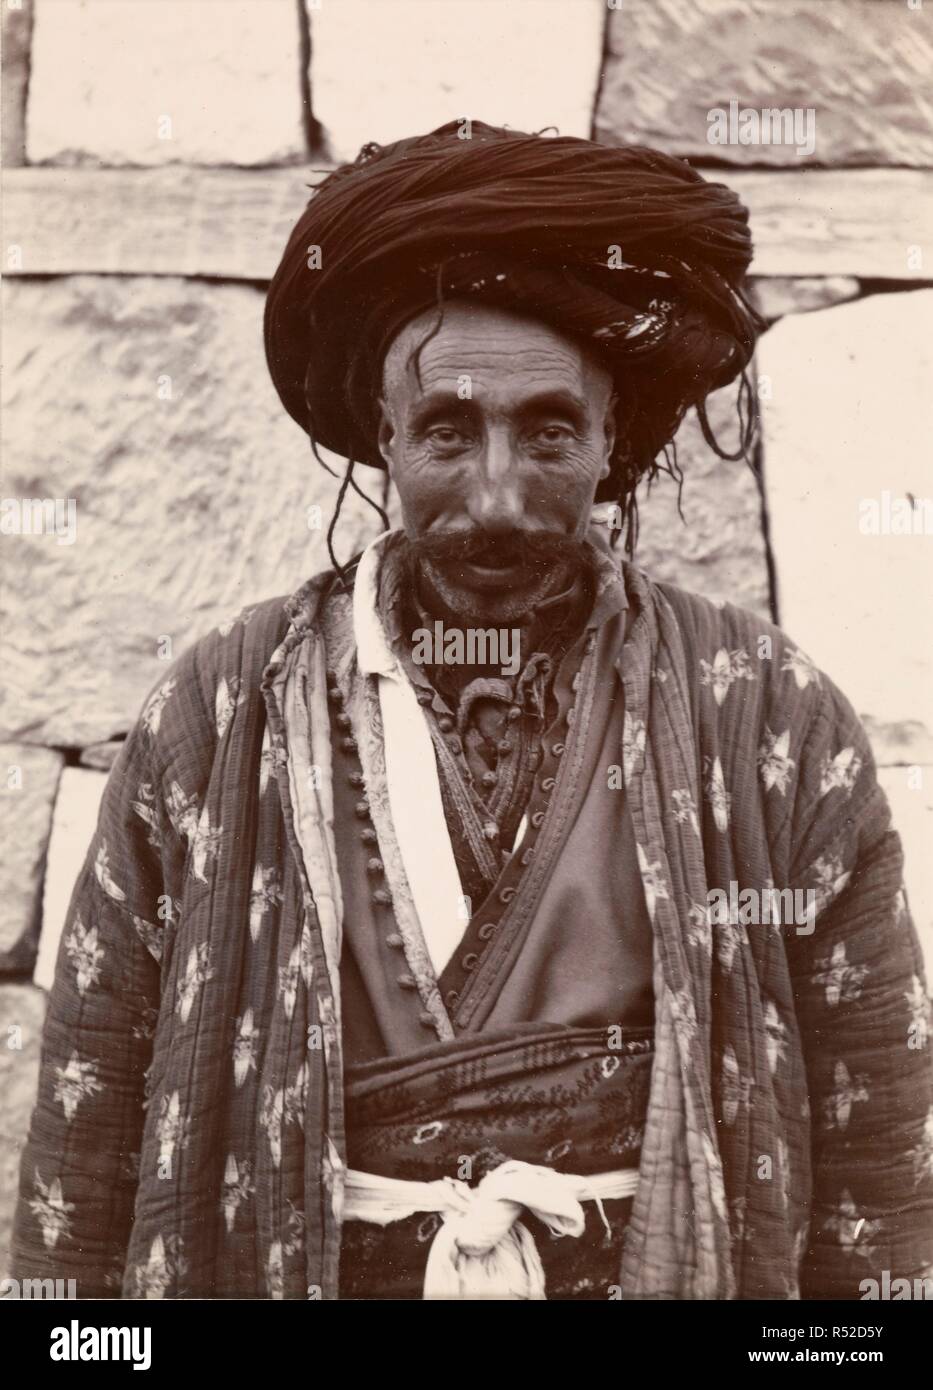 Chief of the Sipkanli Kurds. Curzon Collection: Album Of Armenian And Turkish V. 1893. Portrait of Youssuf Beg, chief of the Sipkanli Kurds. Taken at the village of KÃ¶shk, Autumn 1893. Image taken from Curzon Collection: Album Of Armenian And Turkish Views And Portraits. Originally published/produced in 1893. Source: Photo 430/7(13). Author: Lynch, H. F. B. Stock Photo